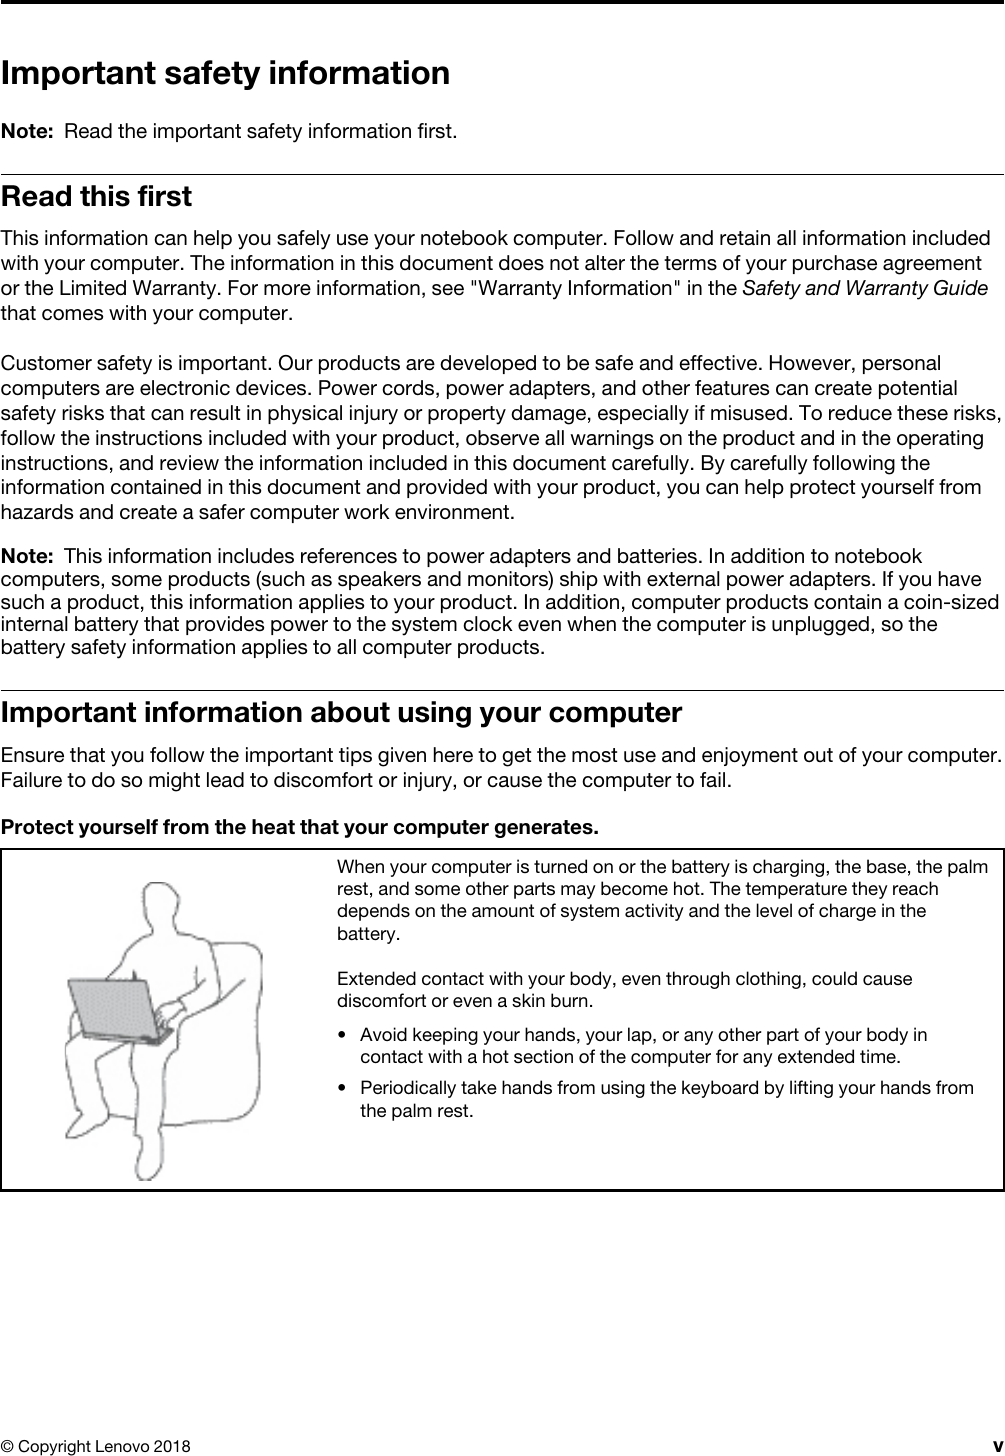 Important safety informationNote: Read the important safety information first.Read this firstThis information can help you safely use your notebook computer. Follow and retain all information included with your computer. The information in this document does not alter the terms of your purchase agreement or the Limited Warranty. For more information, see &quot;Warranty Information&quot; in the Safety and Warranty Guide that comes with your computer.Customer safety is important. Our products are developed to be safe and effective. However, personal computers are electronic devices. Power cords, power adapters, and other features can create potential safety risks that can result in physical injury or property damage, especially if misused. To reduce these risks, follow the instructions included with your product, observe all warnings on the product and in the operating instructions, and review the information included in this document carefully. By carefully following the information contained in this document and provided with your product, you can help protect yourself from hazards and create a safer computer work environment.Note: This information includes references to power adapters and batteries. In addition to notebook computers, some products (such as speakers and monitors) ship with external power adapters. If you have such a product, this information applies to your product. In addition, computer products contain a coin-sized internal battery that provides power to the system clock even when the computer is unplugged, so the battery safety information applies to all computer products.Important information about using your computerEnsure that you follow the important tips given here to get the most use and enjoyment out of your computer. Failure to do so might lead to discomfort or injury, or cause the computer to fail.Protect yourself from the heat that your computer generates.When your computer is turned on or the battery is charging, the base, the palm rest, and some other parts may become hot. The temperature they reach depends on the amount of system activity and the level of charge in the battery.Extended contact with your body, even through clothing, could cause discomfort or even a skin burn. •  Avoid keeping your hands, your lap, or any other part of your body in contact with a hot section of the computer for any extended time.•  Periodically take hands from using the keyboard by lifting your hands from the palm rest.© Copyright Lenovo 2018 v